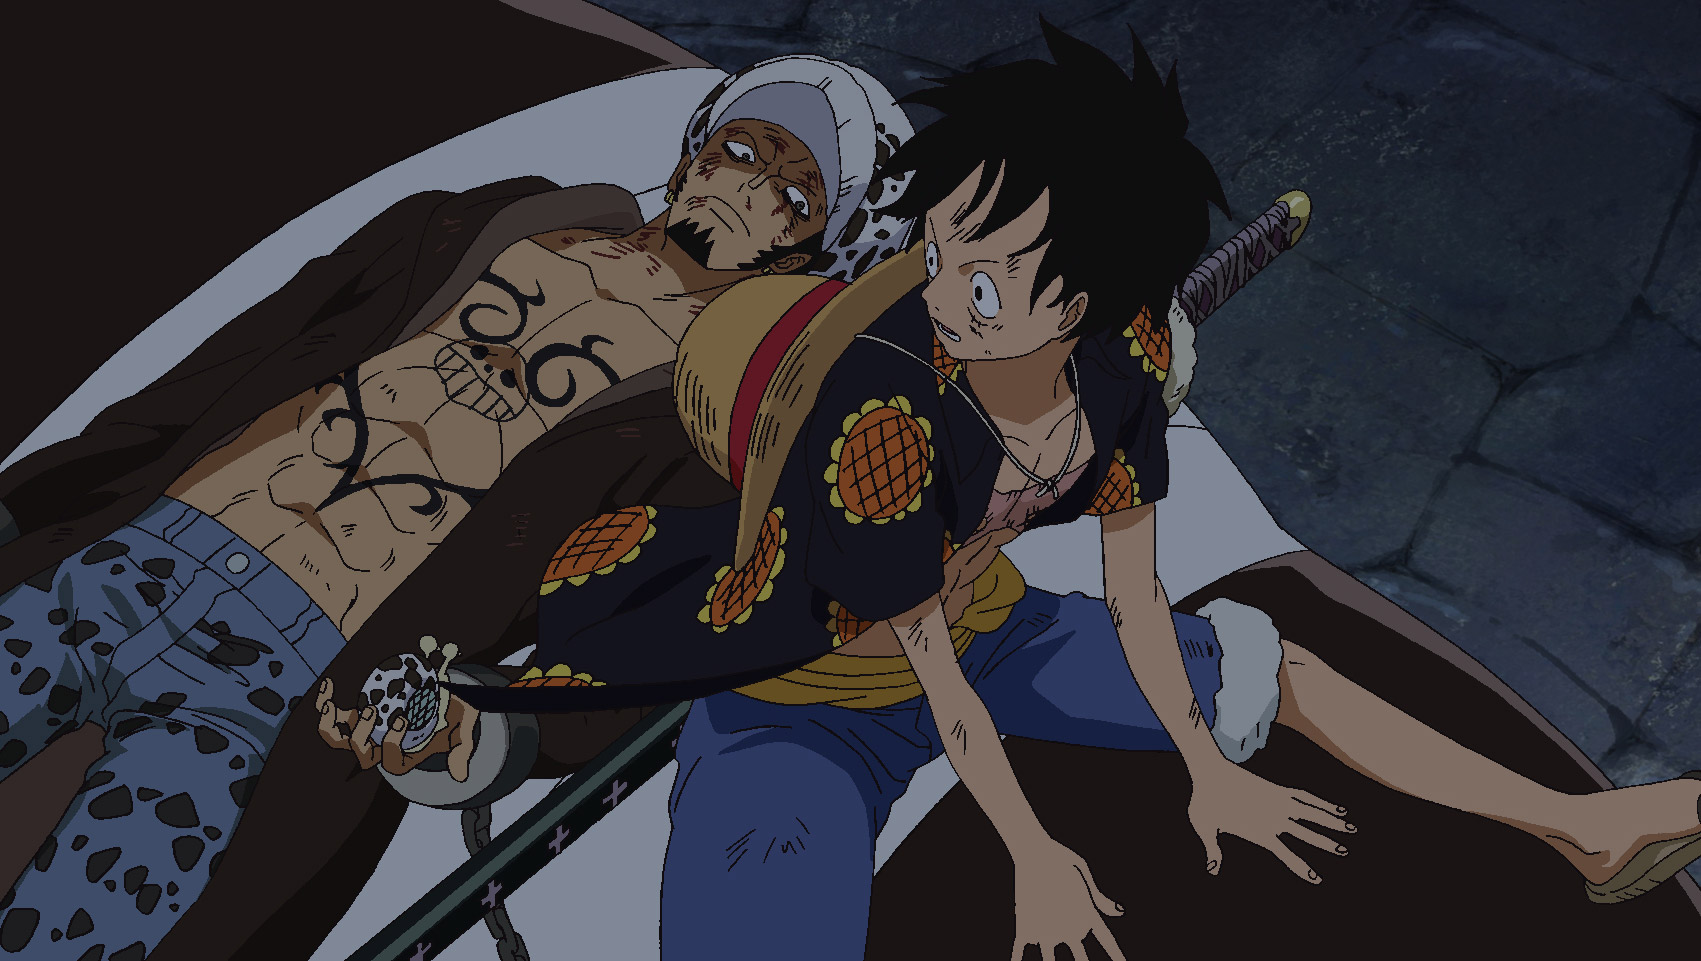 One Piece Season 11 Episode 6 A Desperate Situation Luffy Gets Caught In A Trap Uncut English Video Player Is Loading Play Video Loaded 0 Marathon Lights Language English Language Japanese English Subtitles Subtitles Version Uncut